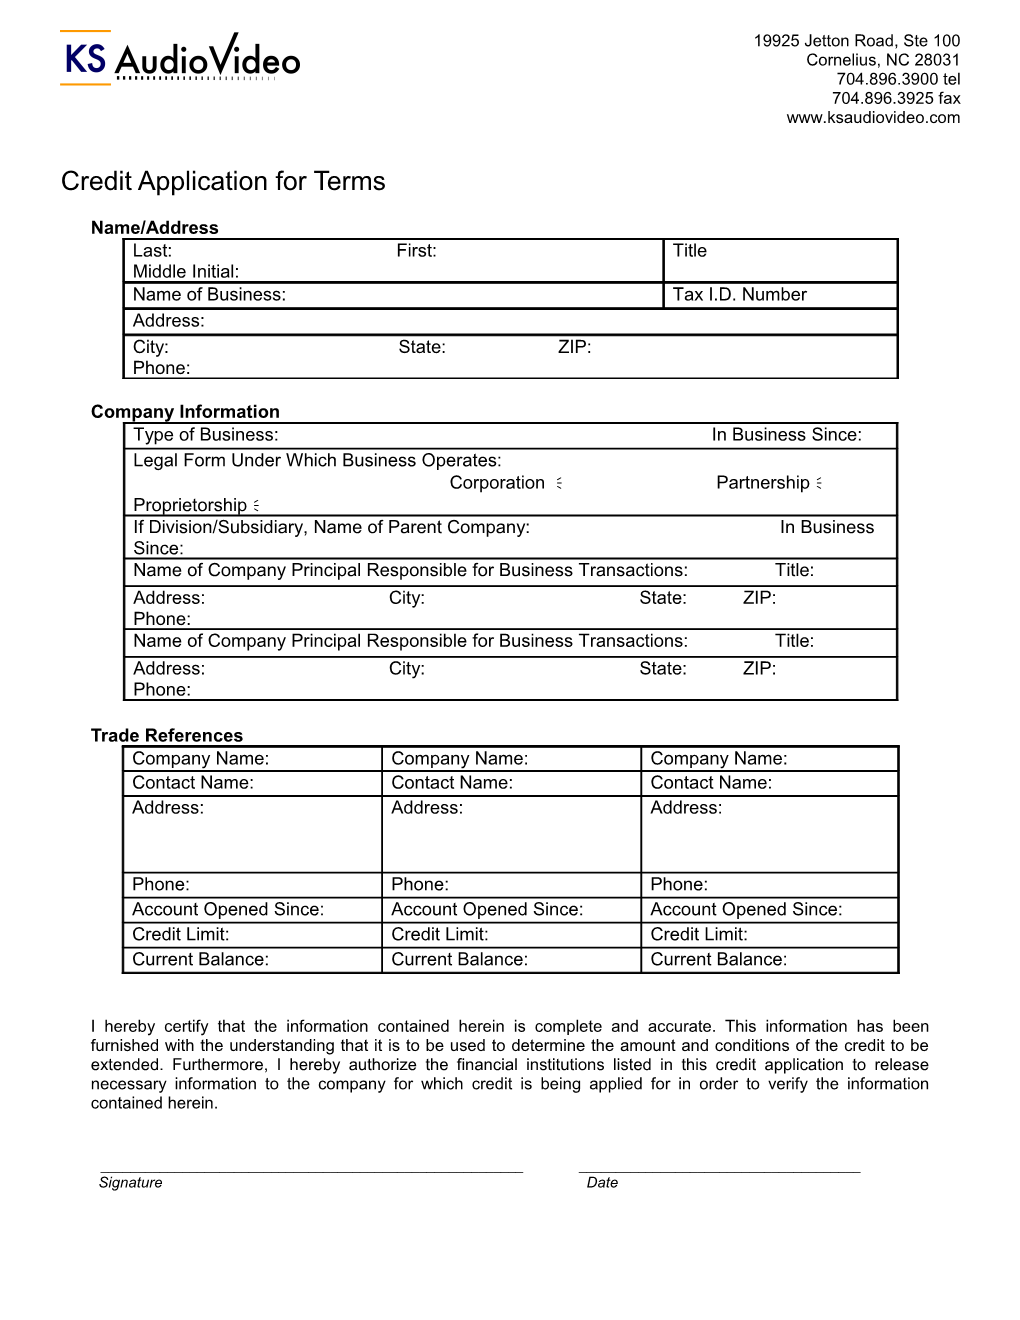 Credit Card Authorization Form s6